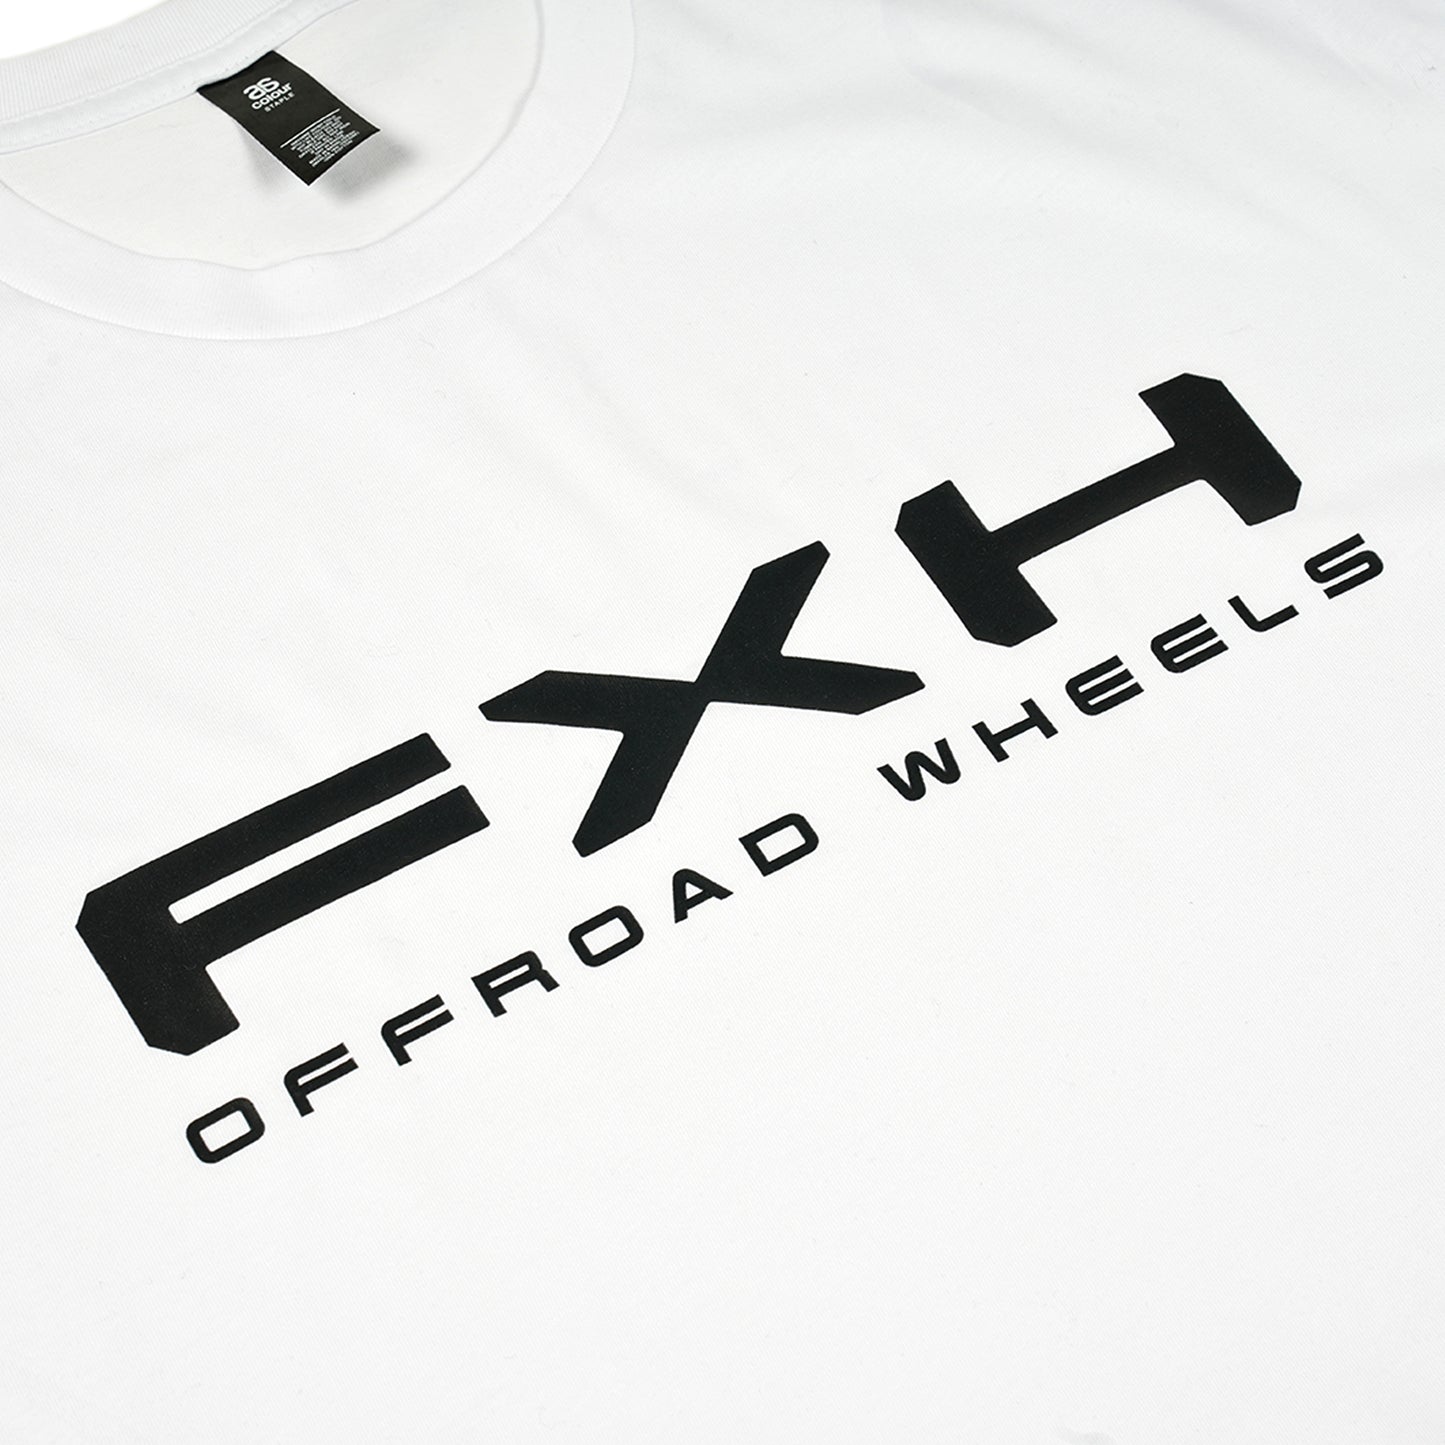 FXH OFFROAD Tee